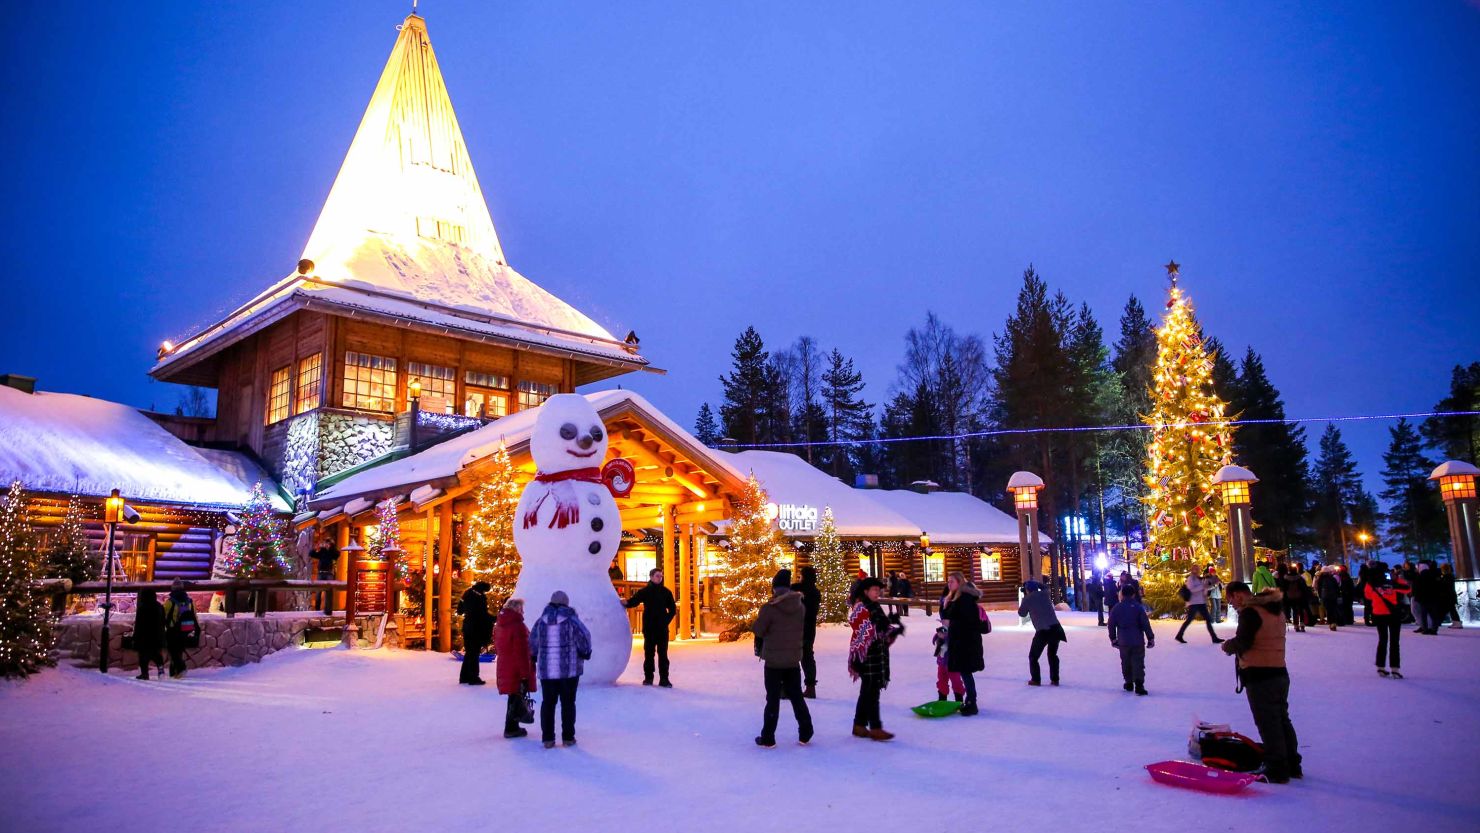 More than 100,000 holidaymakers are expected to travel to Lapland in northern Finland this winter.